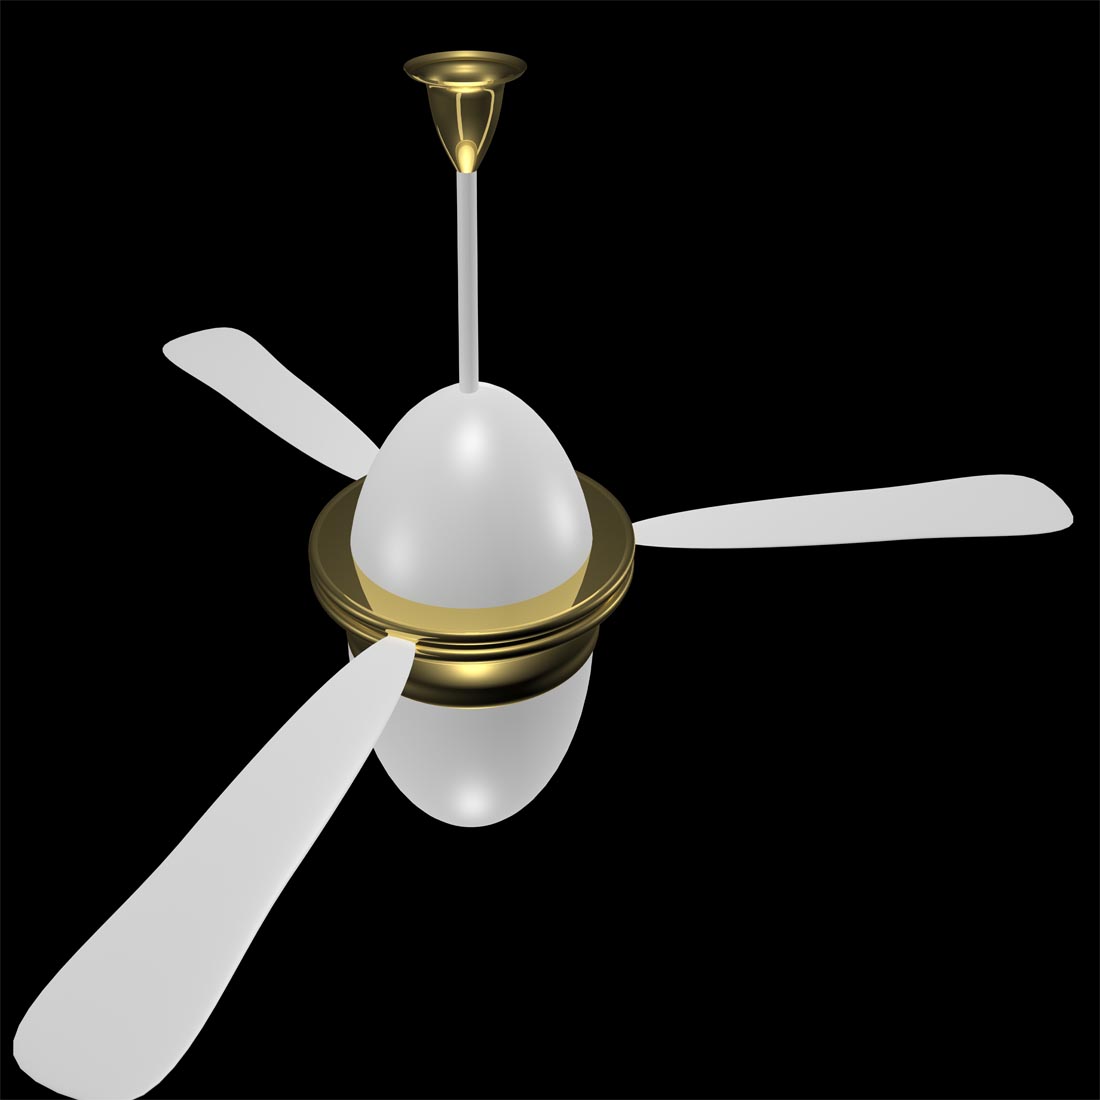 White ceiling fan with two white blades.